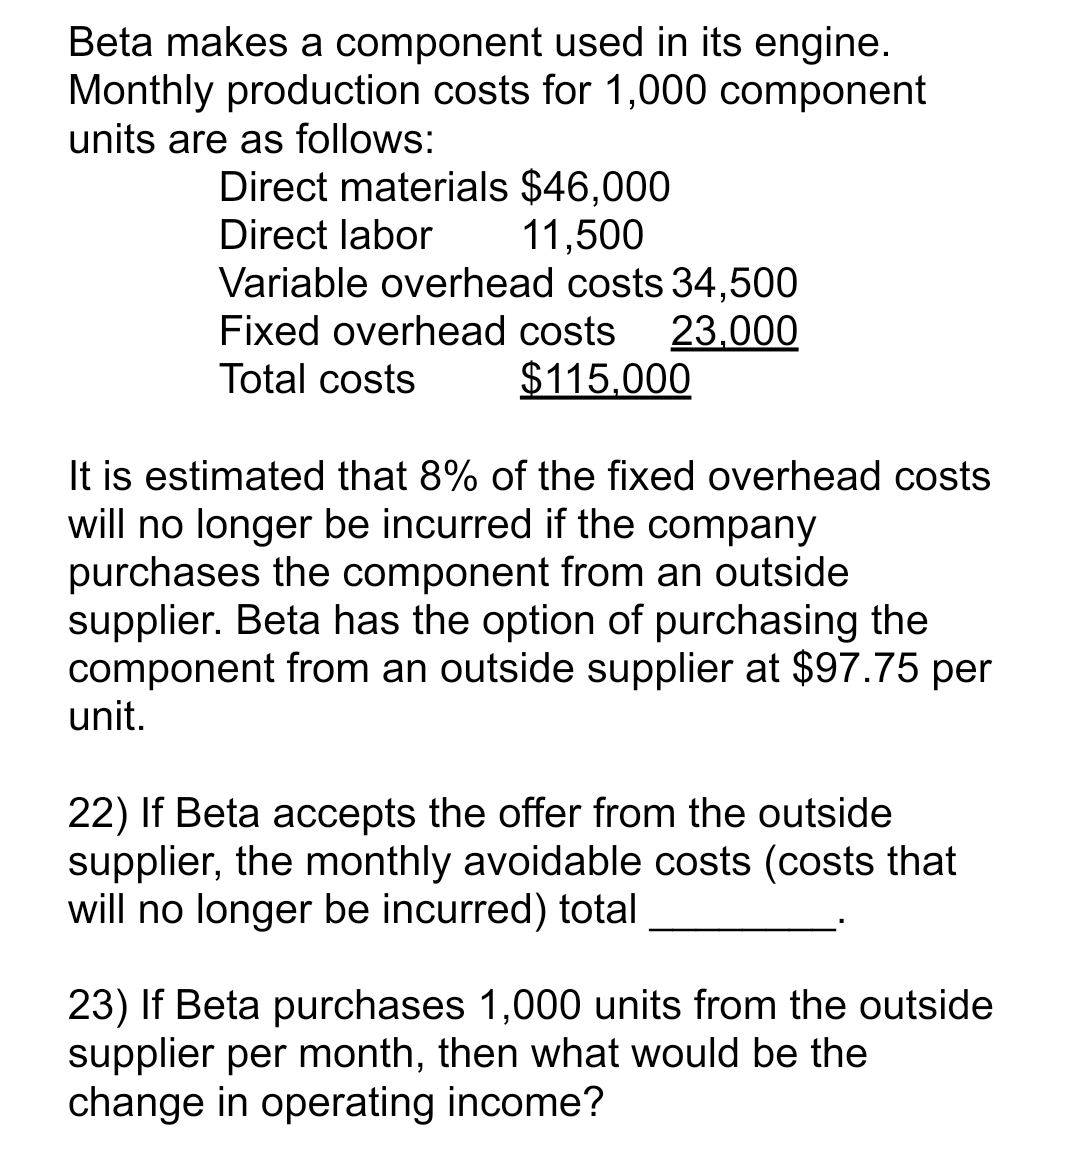 Beta makes a component used in its engine.
Monthly production costs for 1,000 component
units are as follows:
Direct materials $46,000
Direct labor
11,500
Variable overhead costs 34,500
Fixed overhead costs 23,000
Total costs $115,000
It is estimated that 8% of the fixed overhead costs
will no longer be incurred if the company
purchases the component from an outside
supplier. Beta has the option of purchasing the
component from an outside supplier at $97.75 per
unit.
22) If Beta accepts the offer from the outside
supplier, the monthly avoidable costs (costs that
will no longer be incurred) total
23) If Beta purchases 1,000 units from the outside
supplier per month, then what would be the
change in operating income?